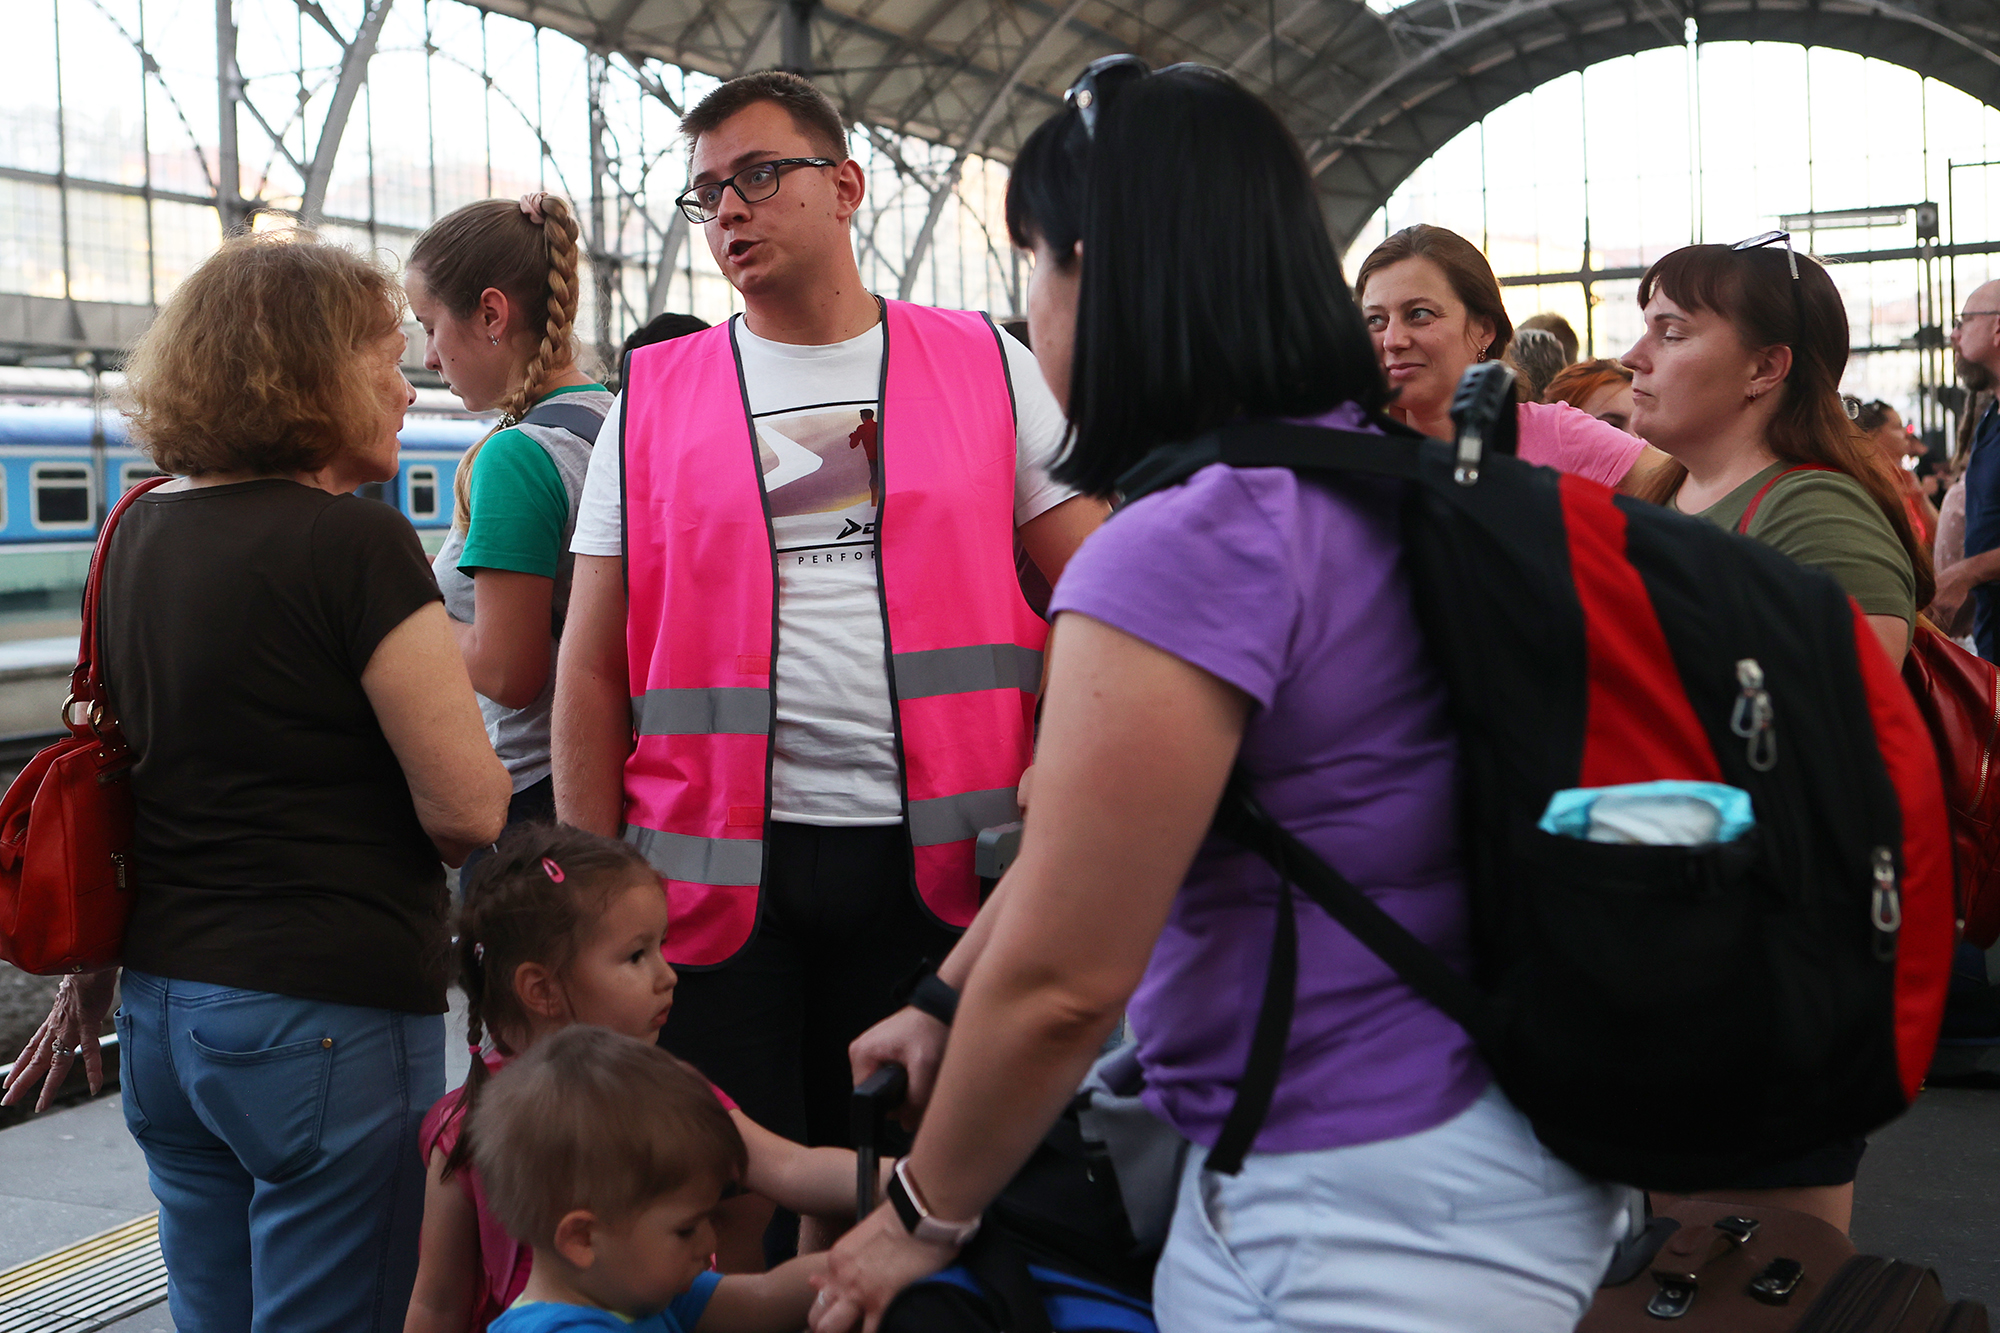 At Prague train station, Russians and Ukrainians volunteer together to help refugees on July 20.